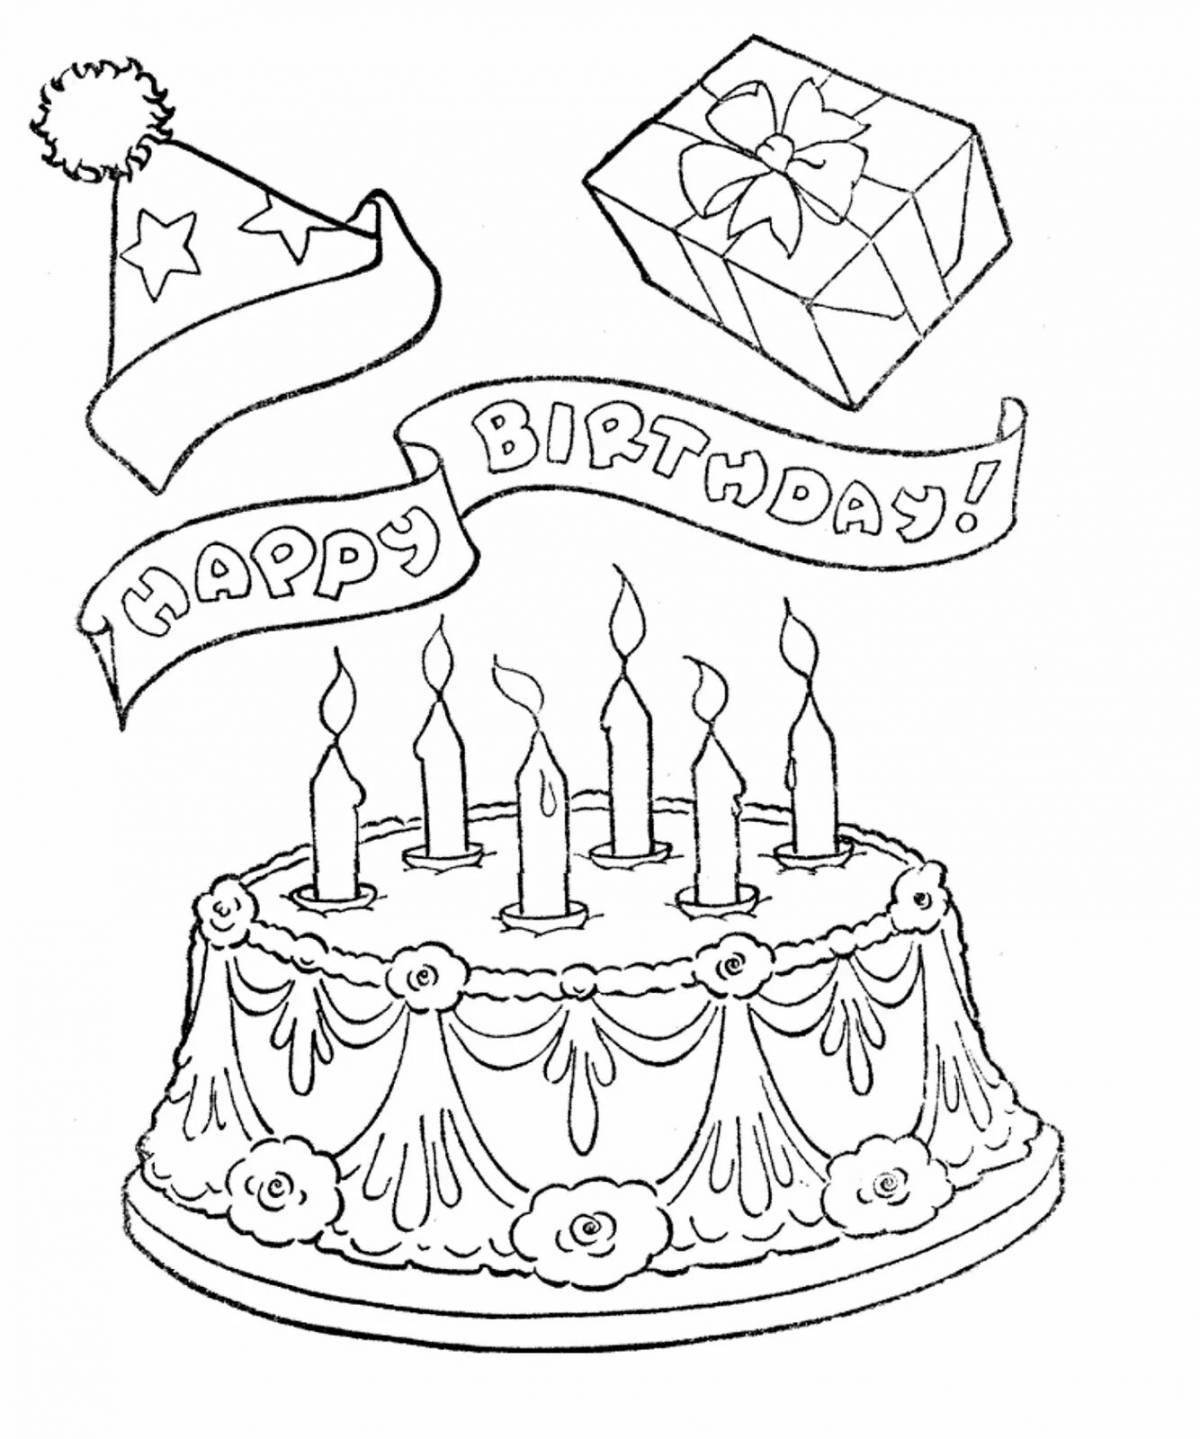 Happy Birthday Dad Color Explosion coloring page for kids